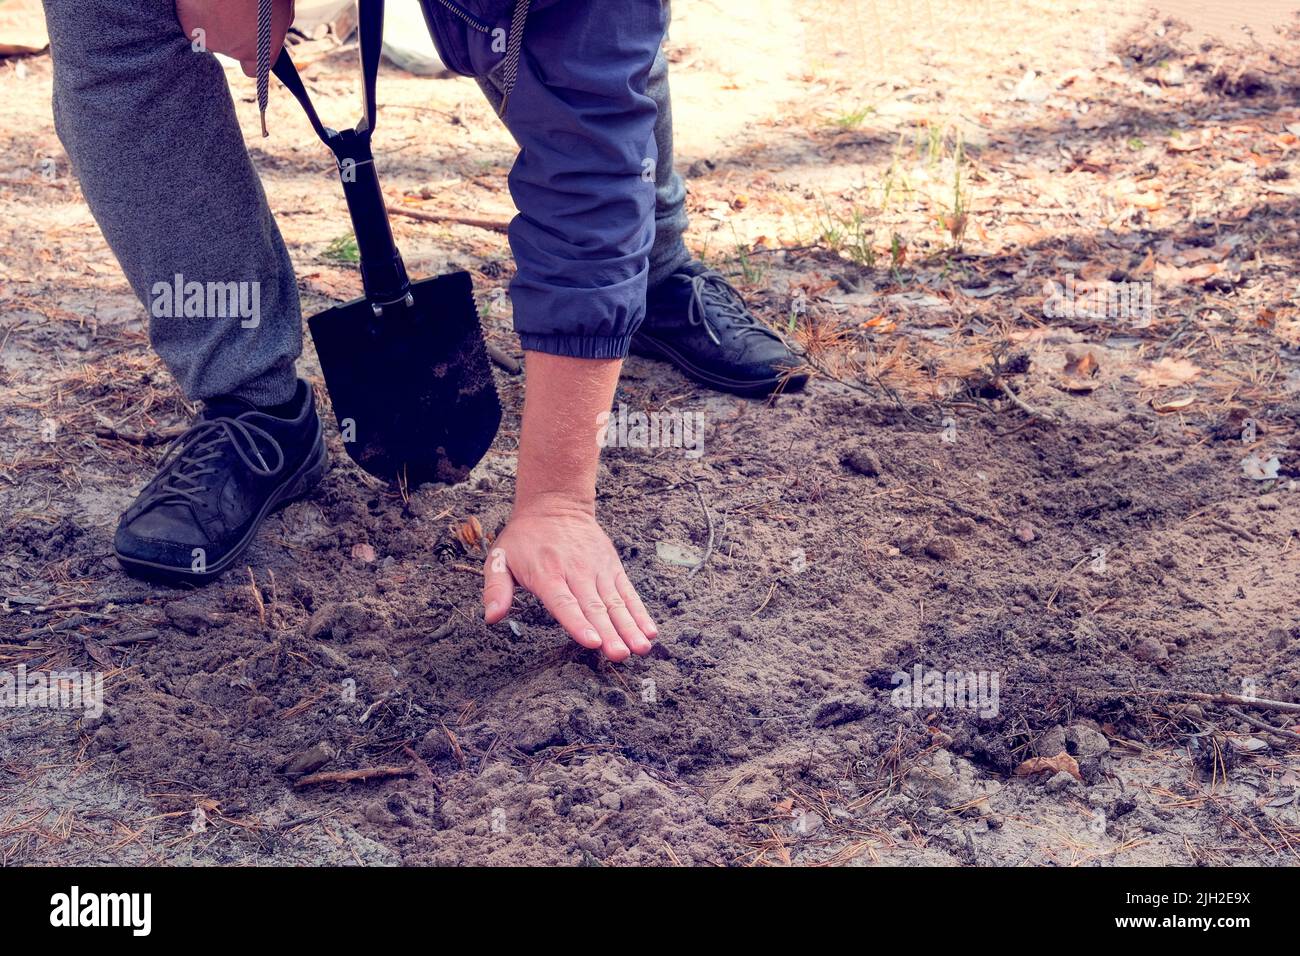 Man digs soil with a shovel in the forest. Black shovel in human hands. Stock Photo